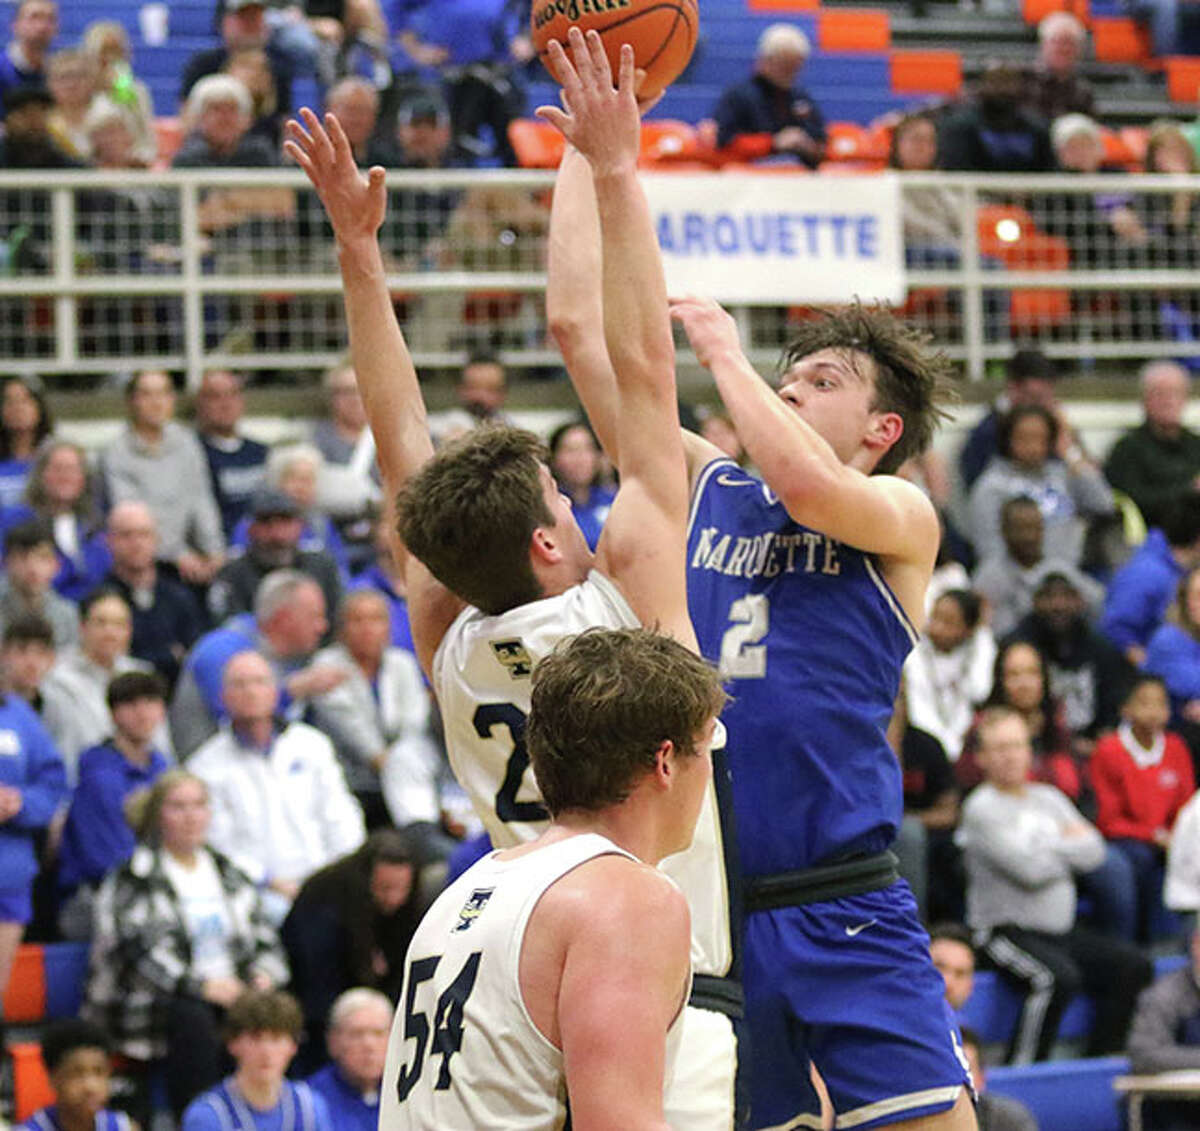 Marquette Catholic's Braden Kline (right) puts up a shot in the lane over T-Town's James Niebrugge in the second half in a Class 2A sectional semifinal on Wednesday night in Newton.